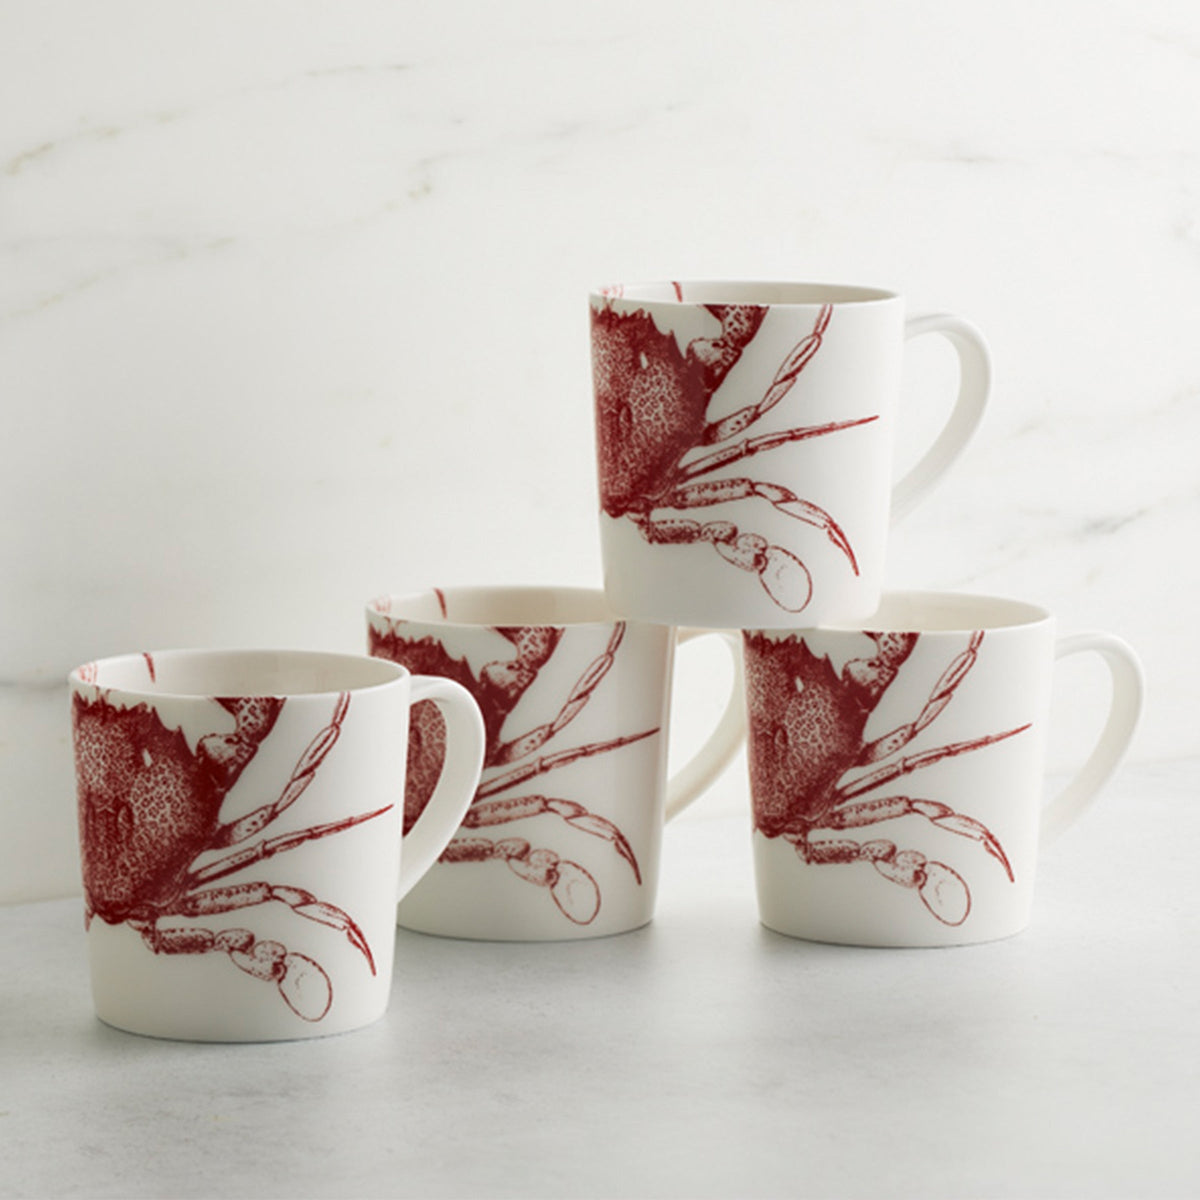 Four Caskata Artisanal Home Crab Red Mugs with large red crabs on them, perfect for coastal whimsy enthusiasts. These mugs are dishwasher and microwave safe.